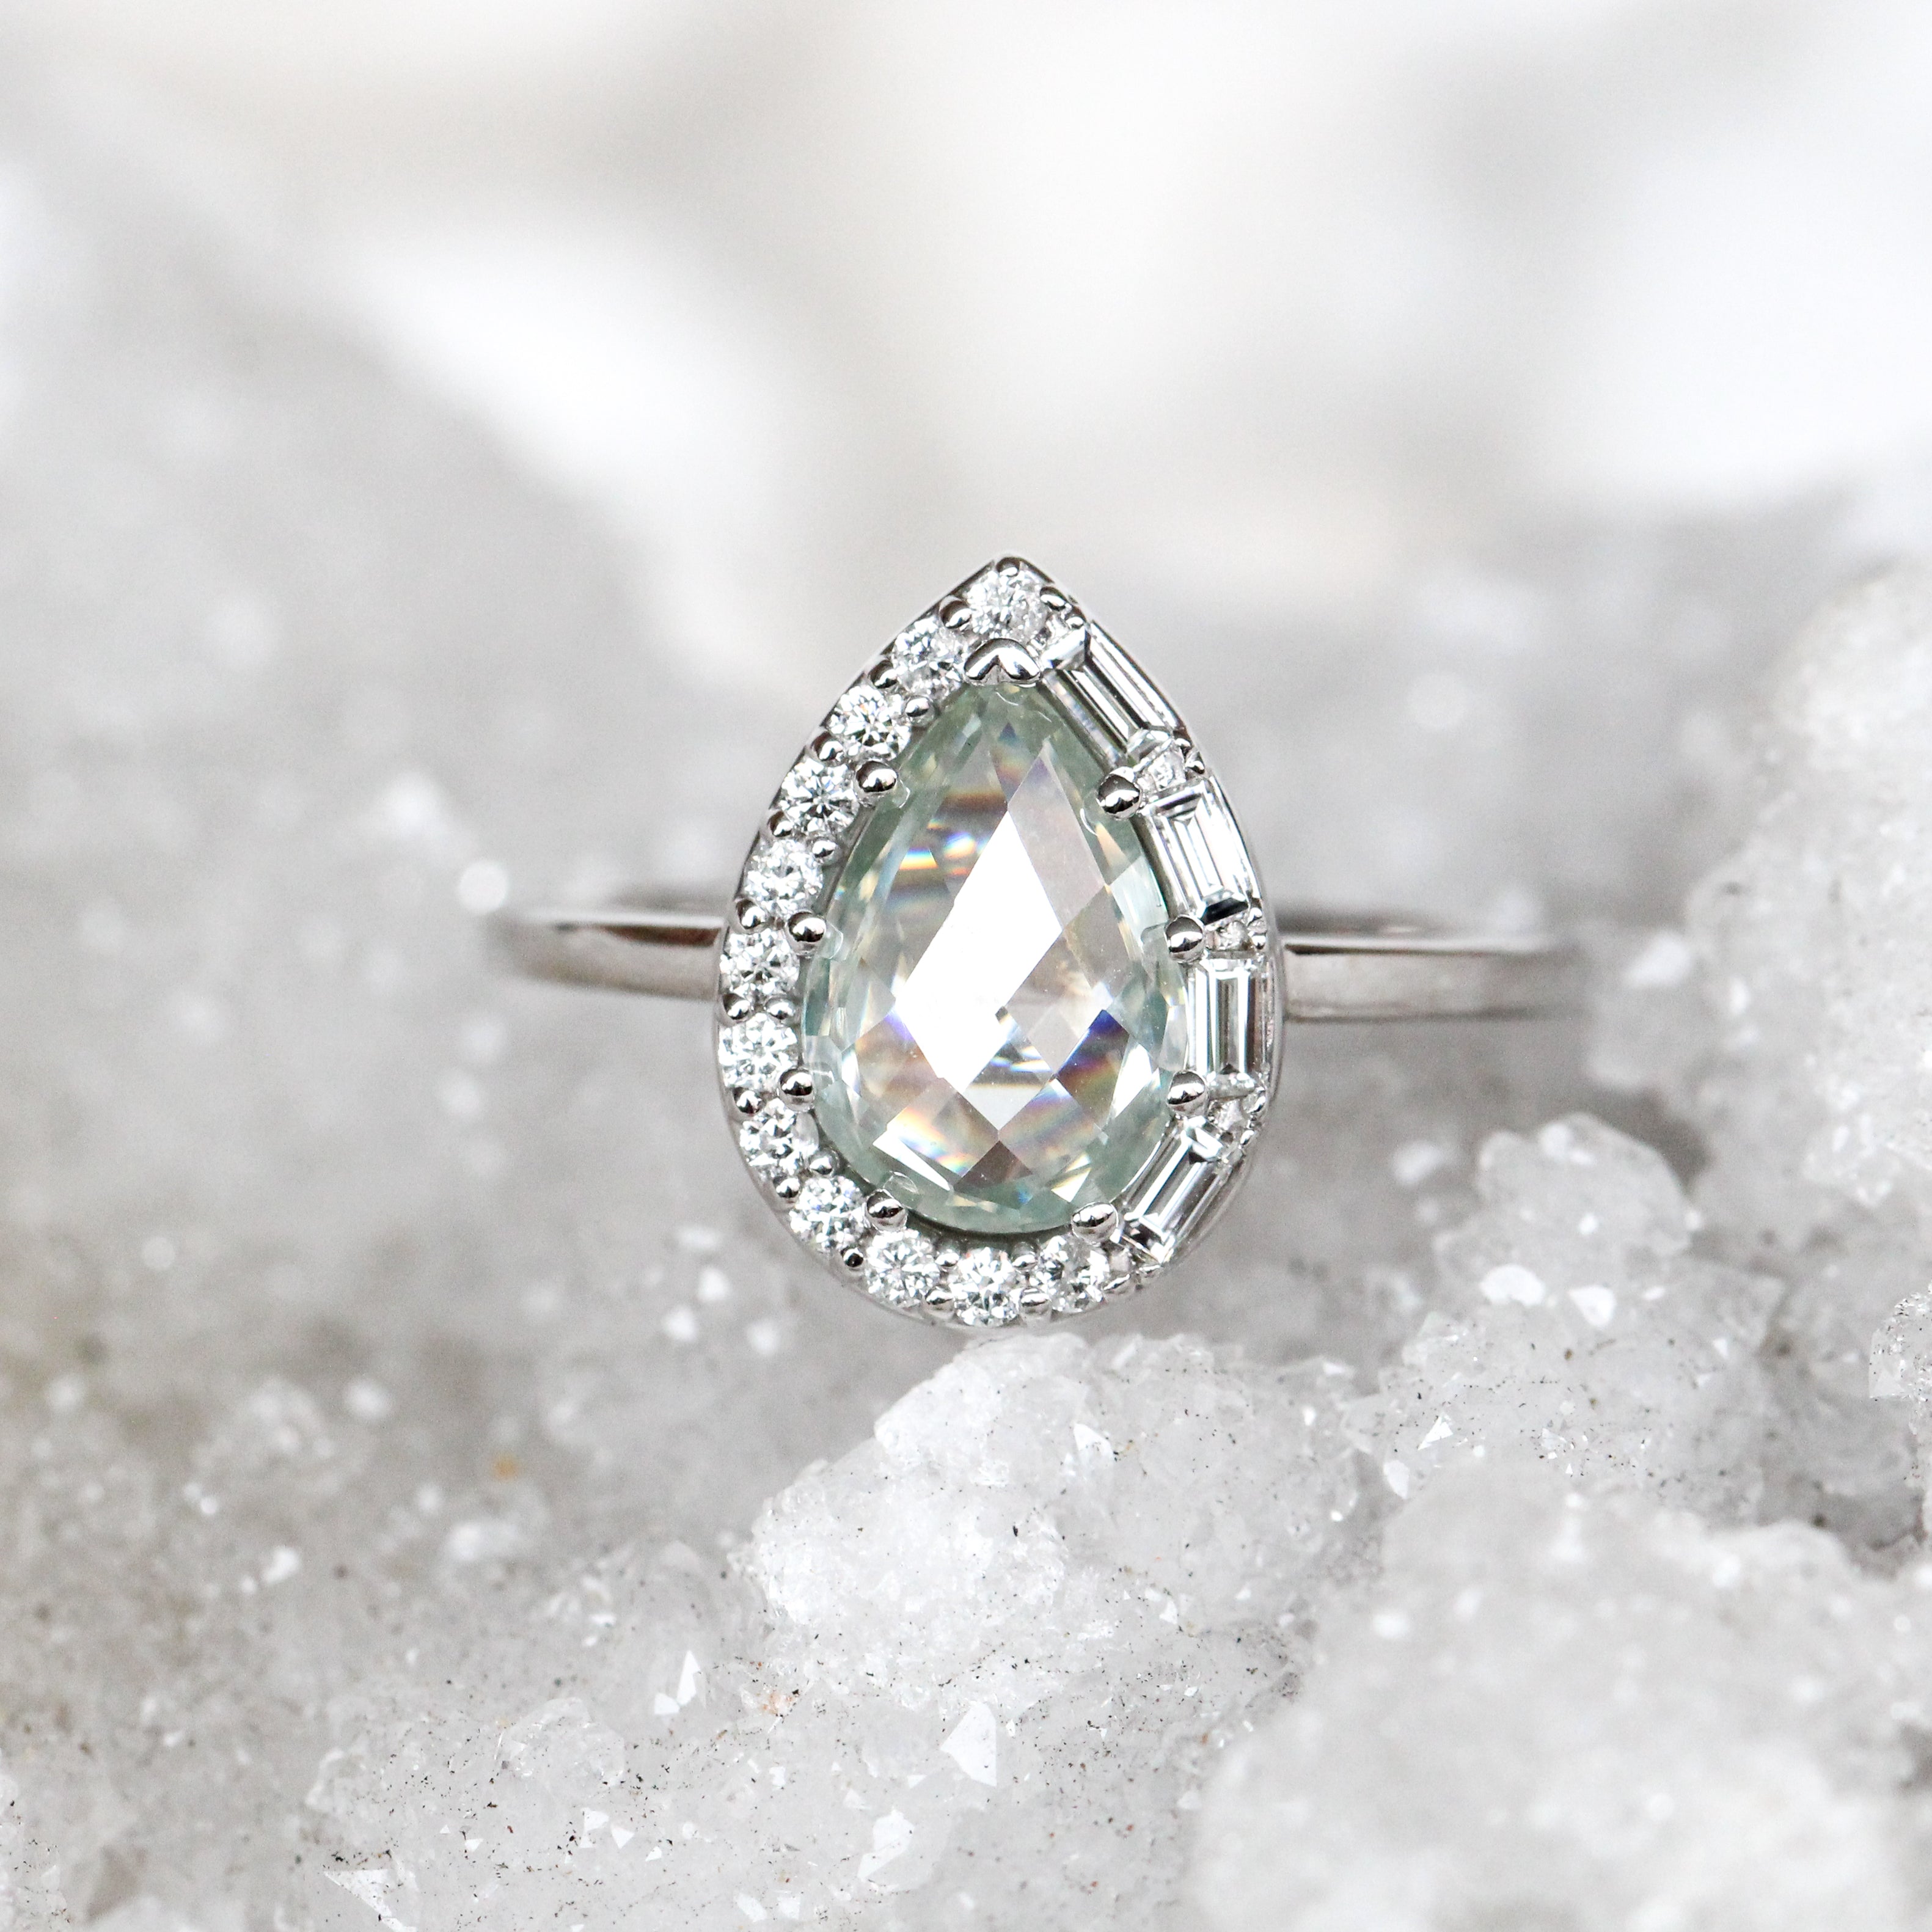 Collins Ring with a 1 Carat Clear Moissanite and White Accent Diamonds in 10k White Gold - Ready to Size and Ship - Midwinter Co. Alternative Bridal Rings and Modern Fine Jewelry